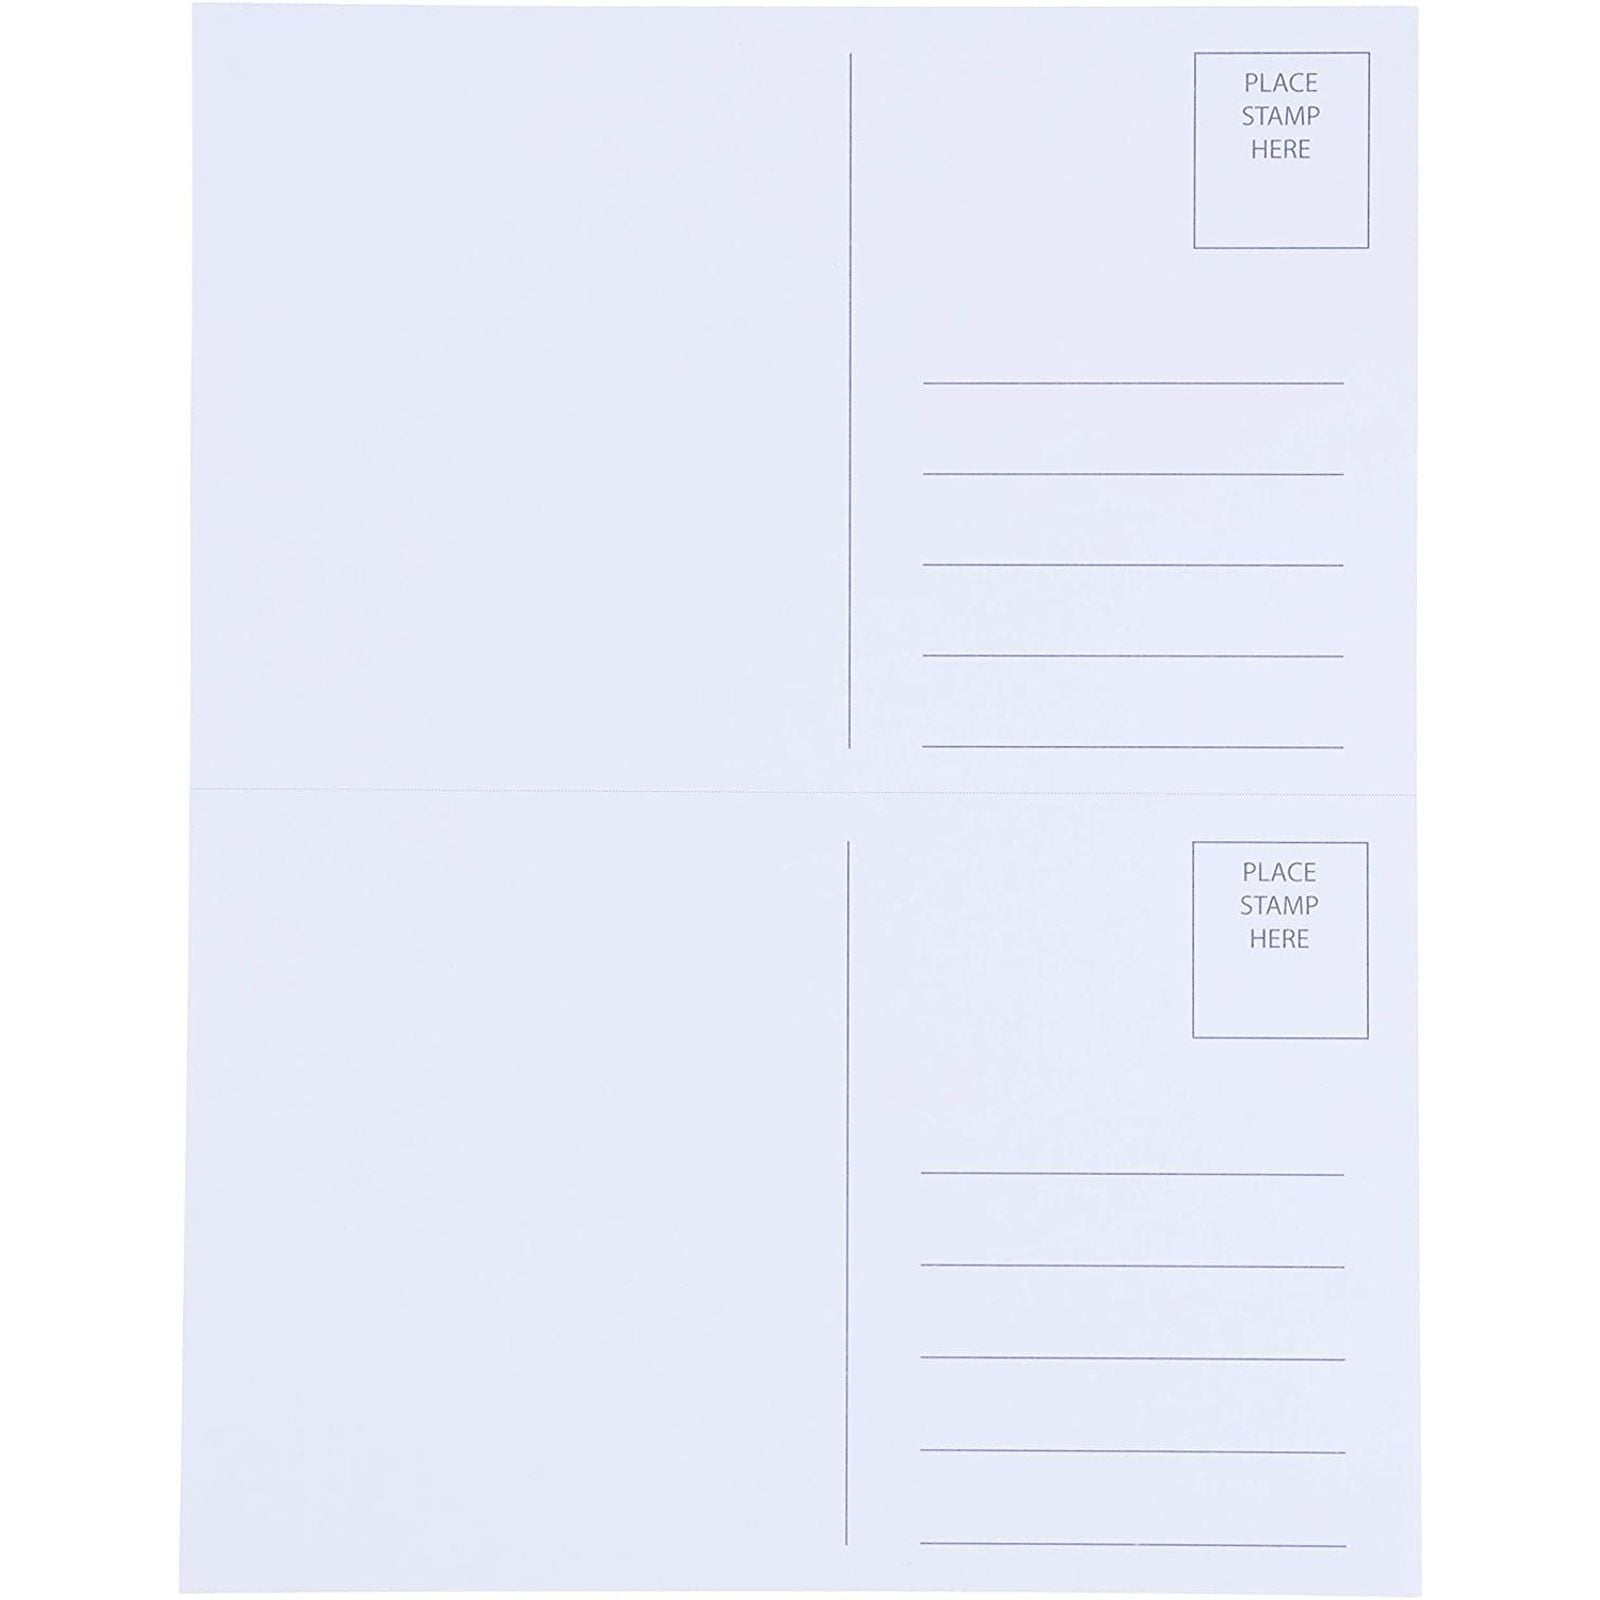 Blank Postcards - 211-Sheet 211-Cards Printable Postcards, 21-Up Perforated  Laser and Inkjet Printer Postcards, Self Mailer Mailing Side Postcards, With Free Postcard Template 4 Per Page